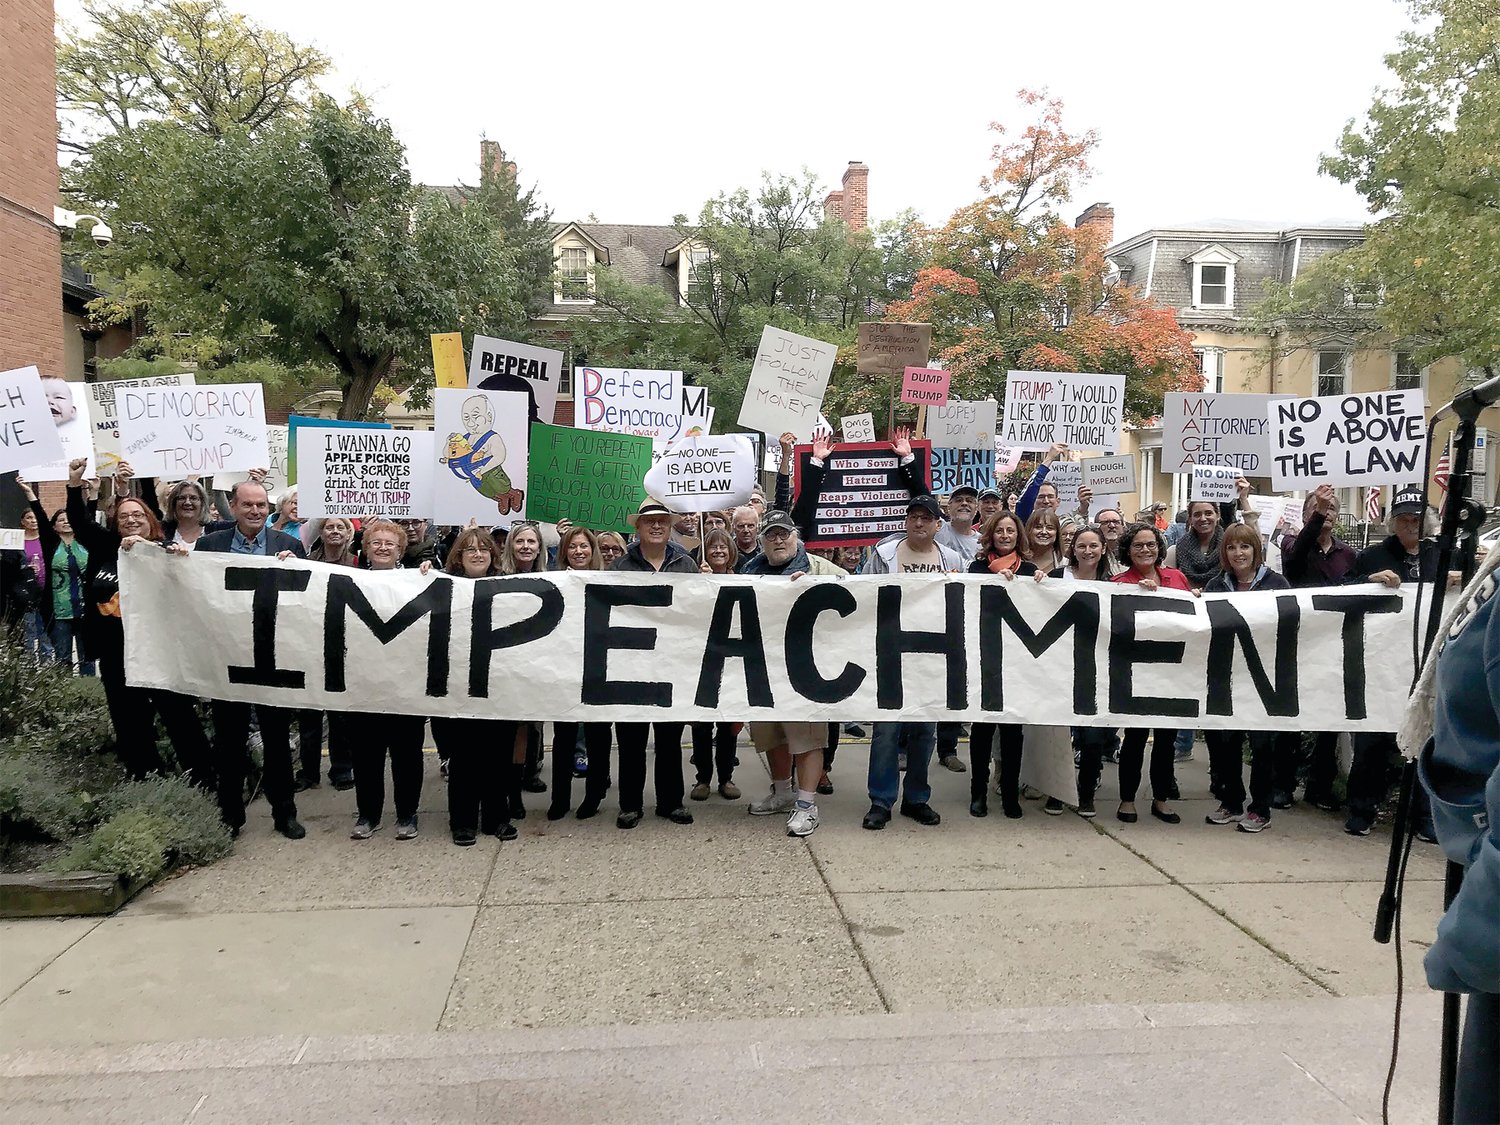 Citizens cathered in Doylestown last weekend to support impeachment inquiry.